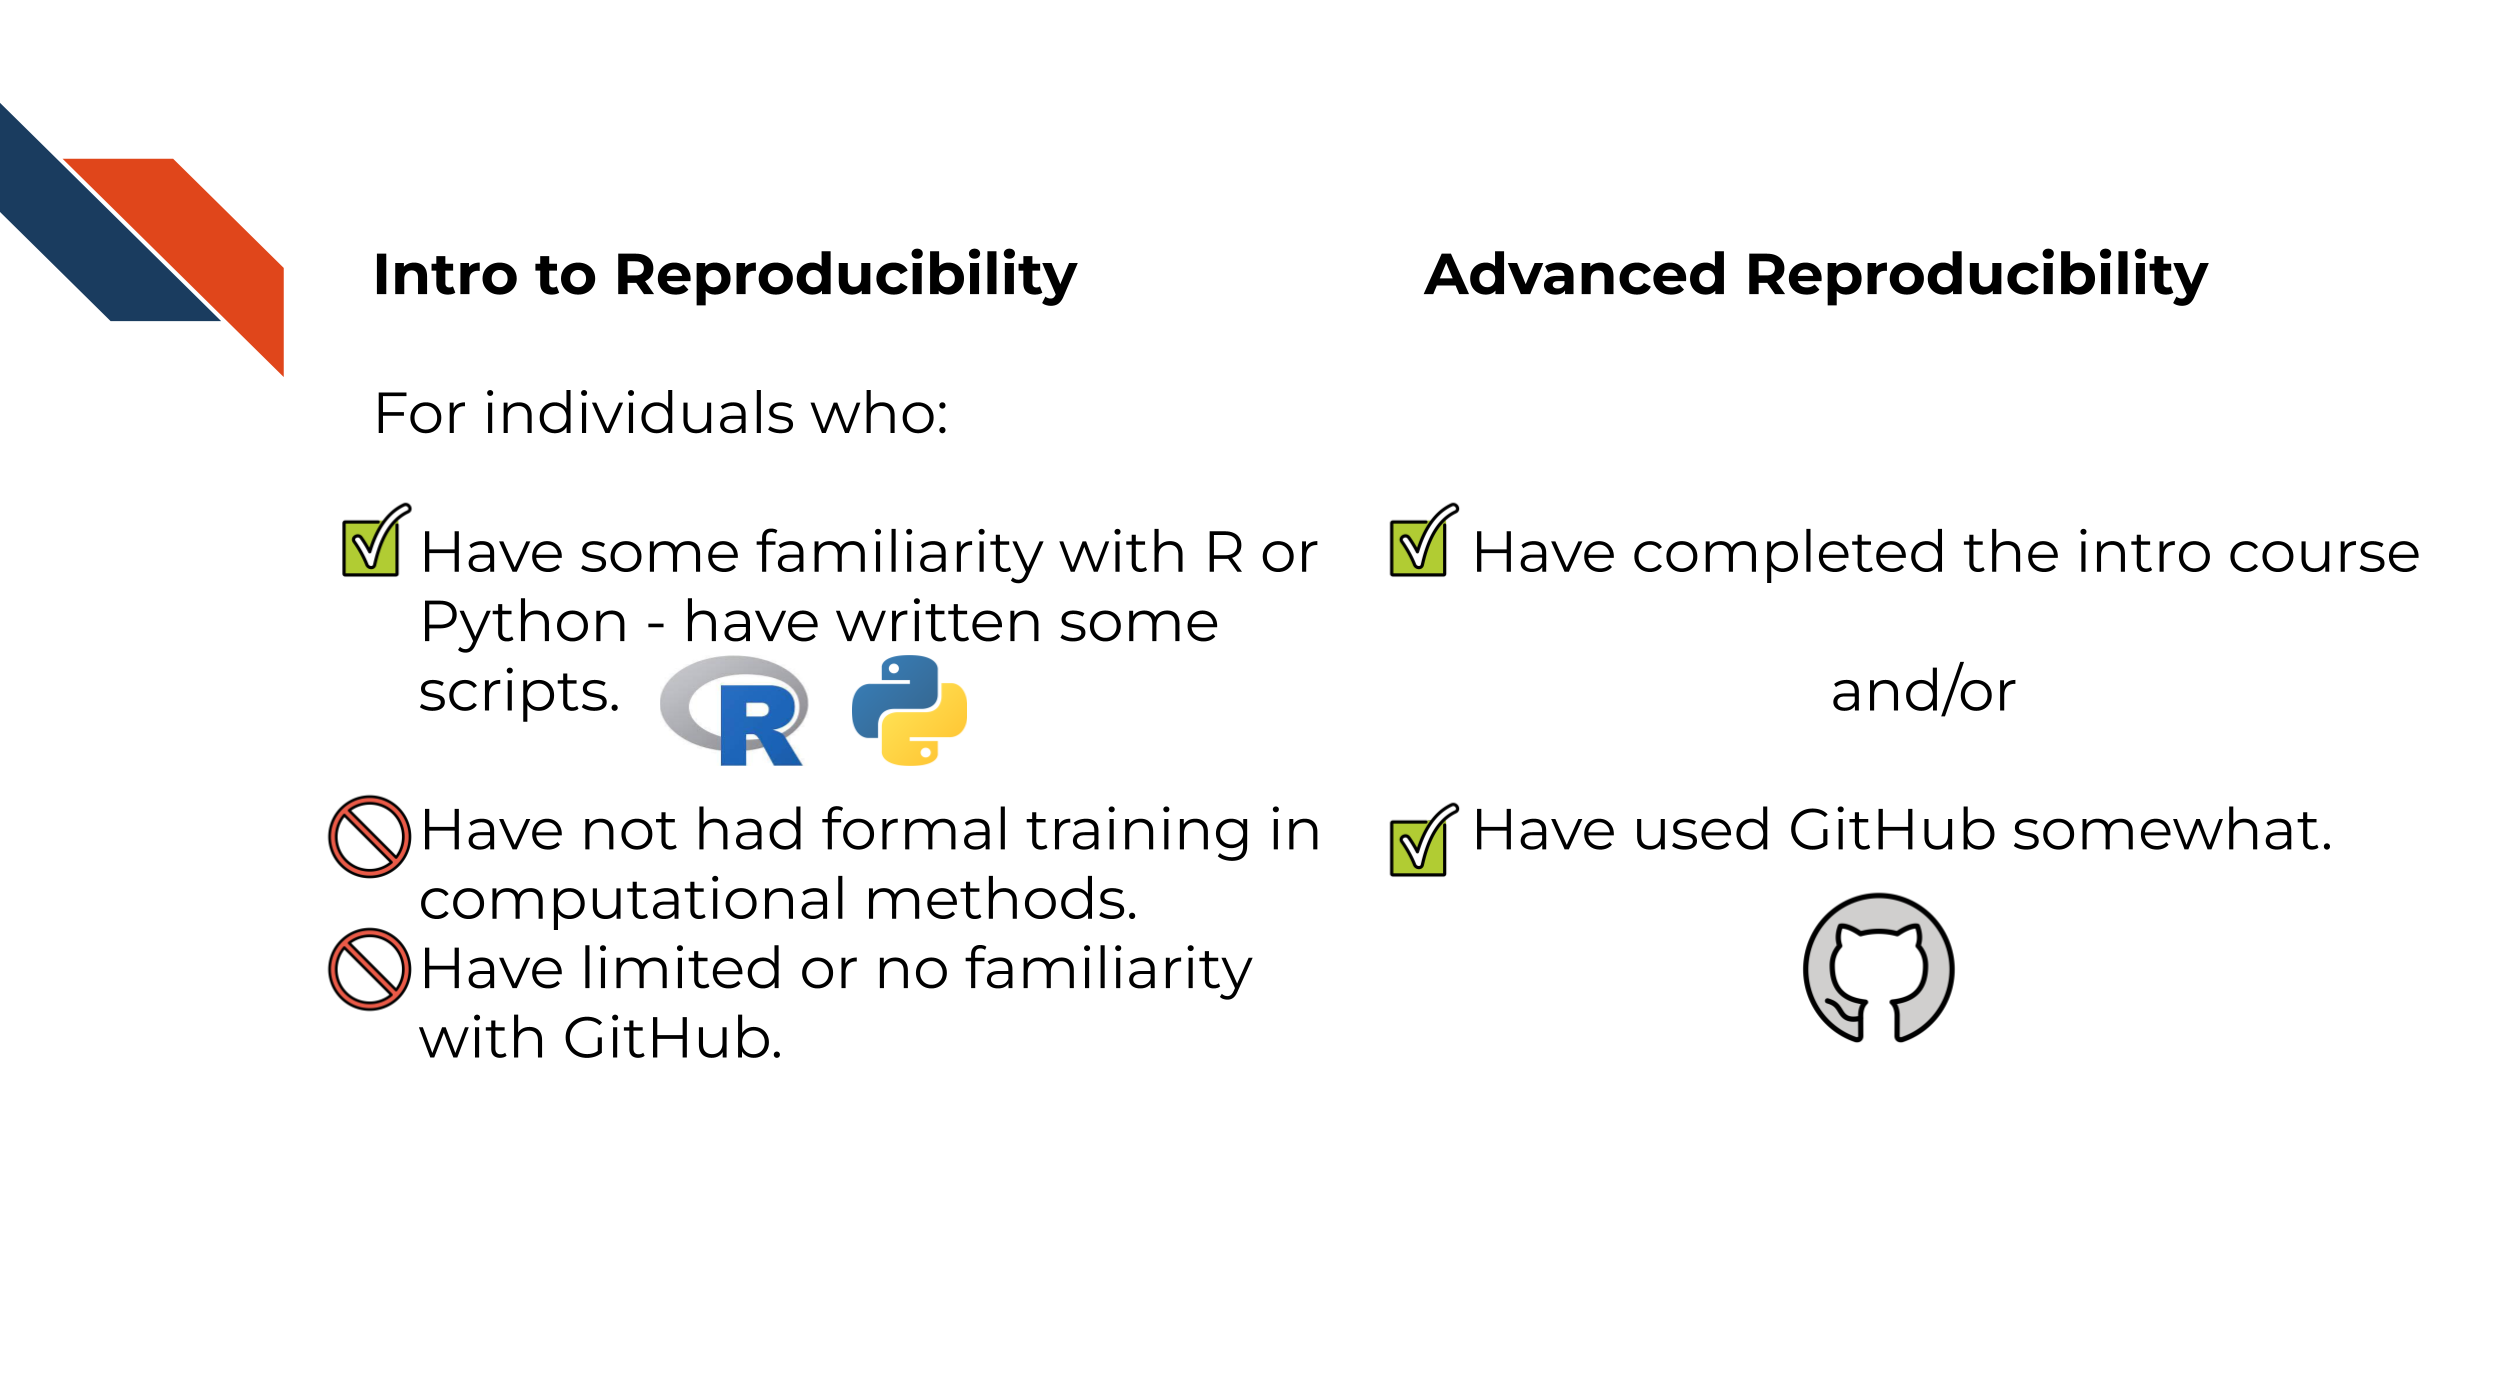 Intro to Reproducibility: For individuals who: Have some familiarity with R or Python - have written some scripts. Have not had formal training in computational methods. Have limited or no familiarity with GitHub. Advanced Reproducibility: For individuals who: Have completed the intro course and/or Have used GitHub somewhat.